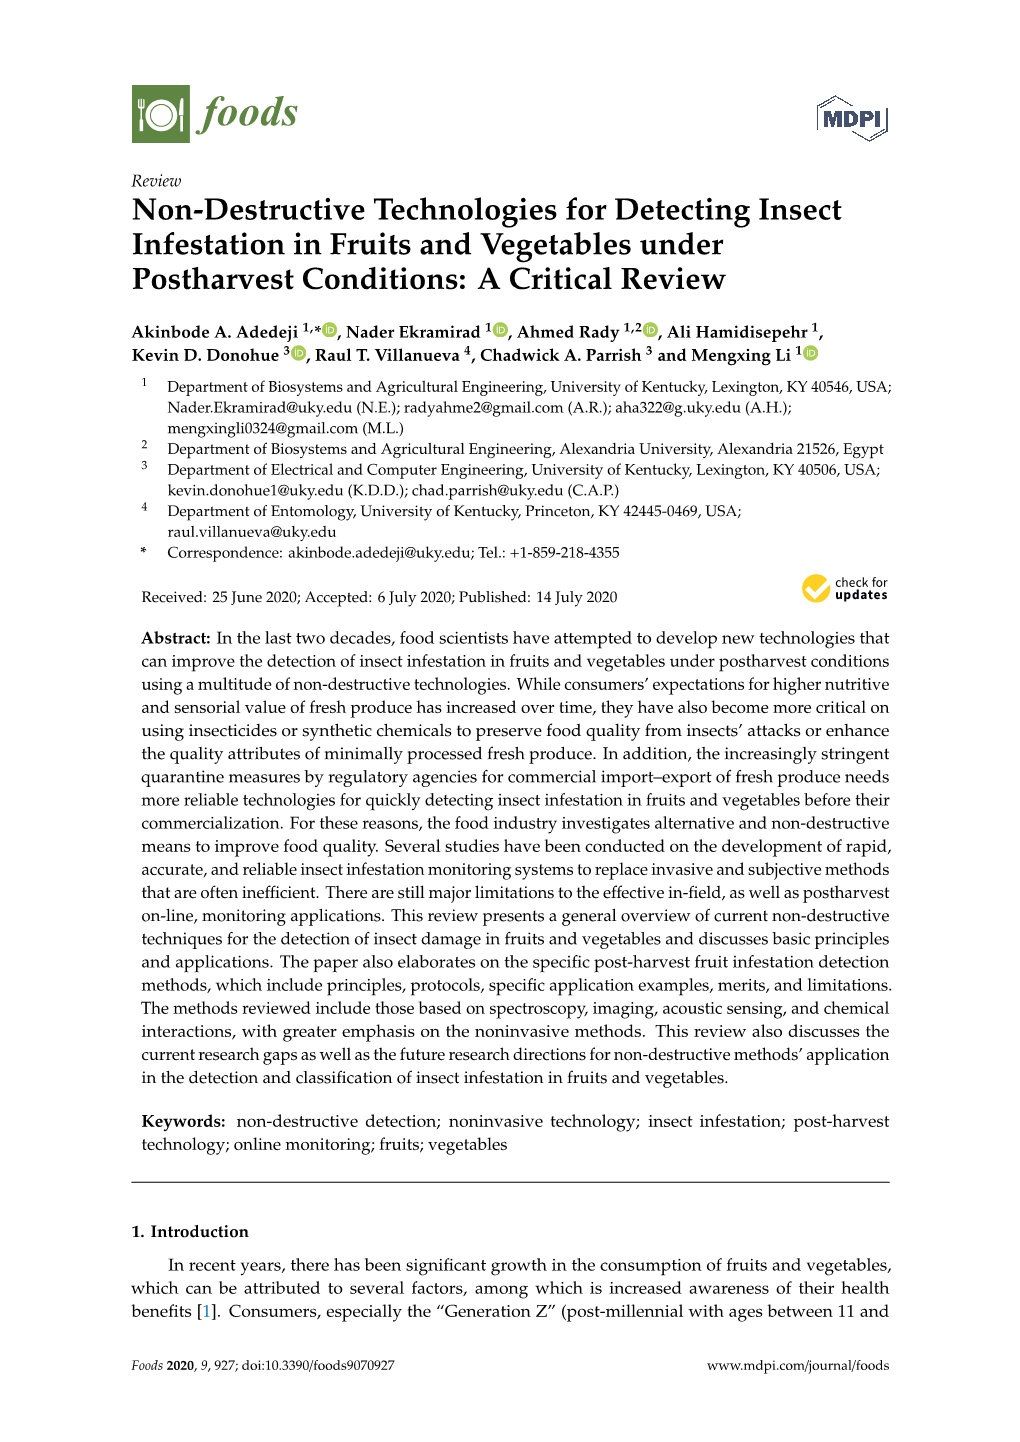 Non-Destructive Technologies for Detecting Insect Infestation in Fruits and Vegetables Under Postharvest Conditions: a Critical Review